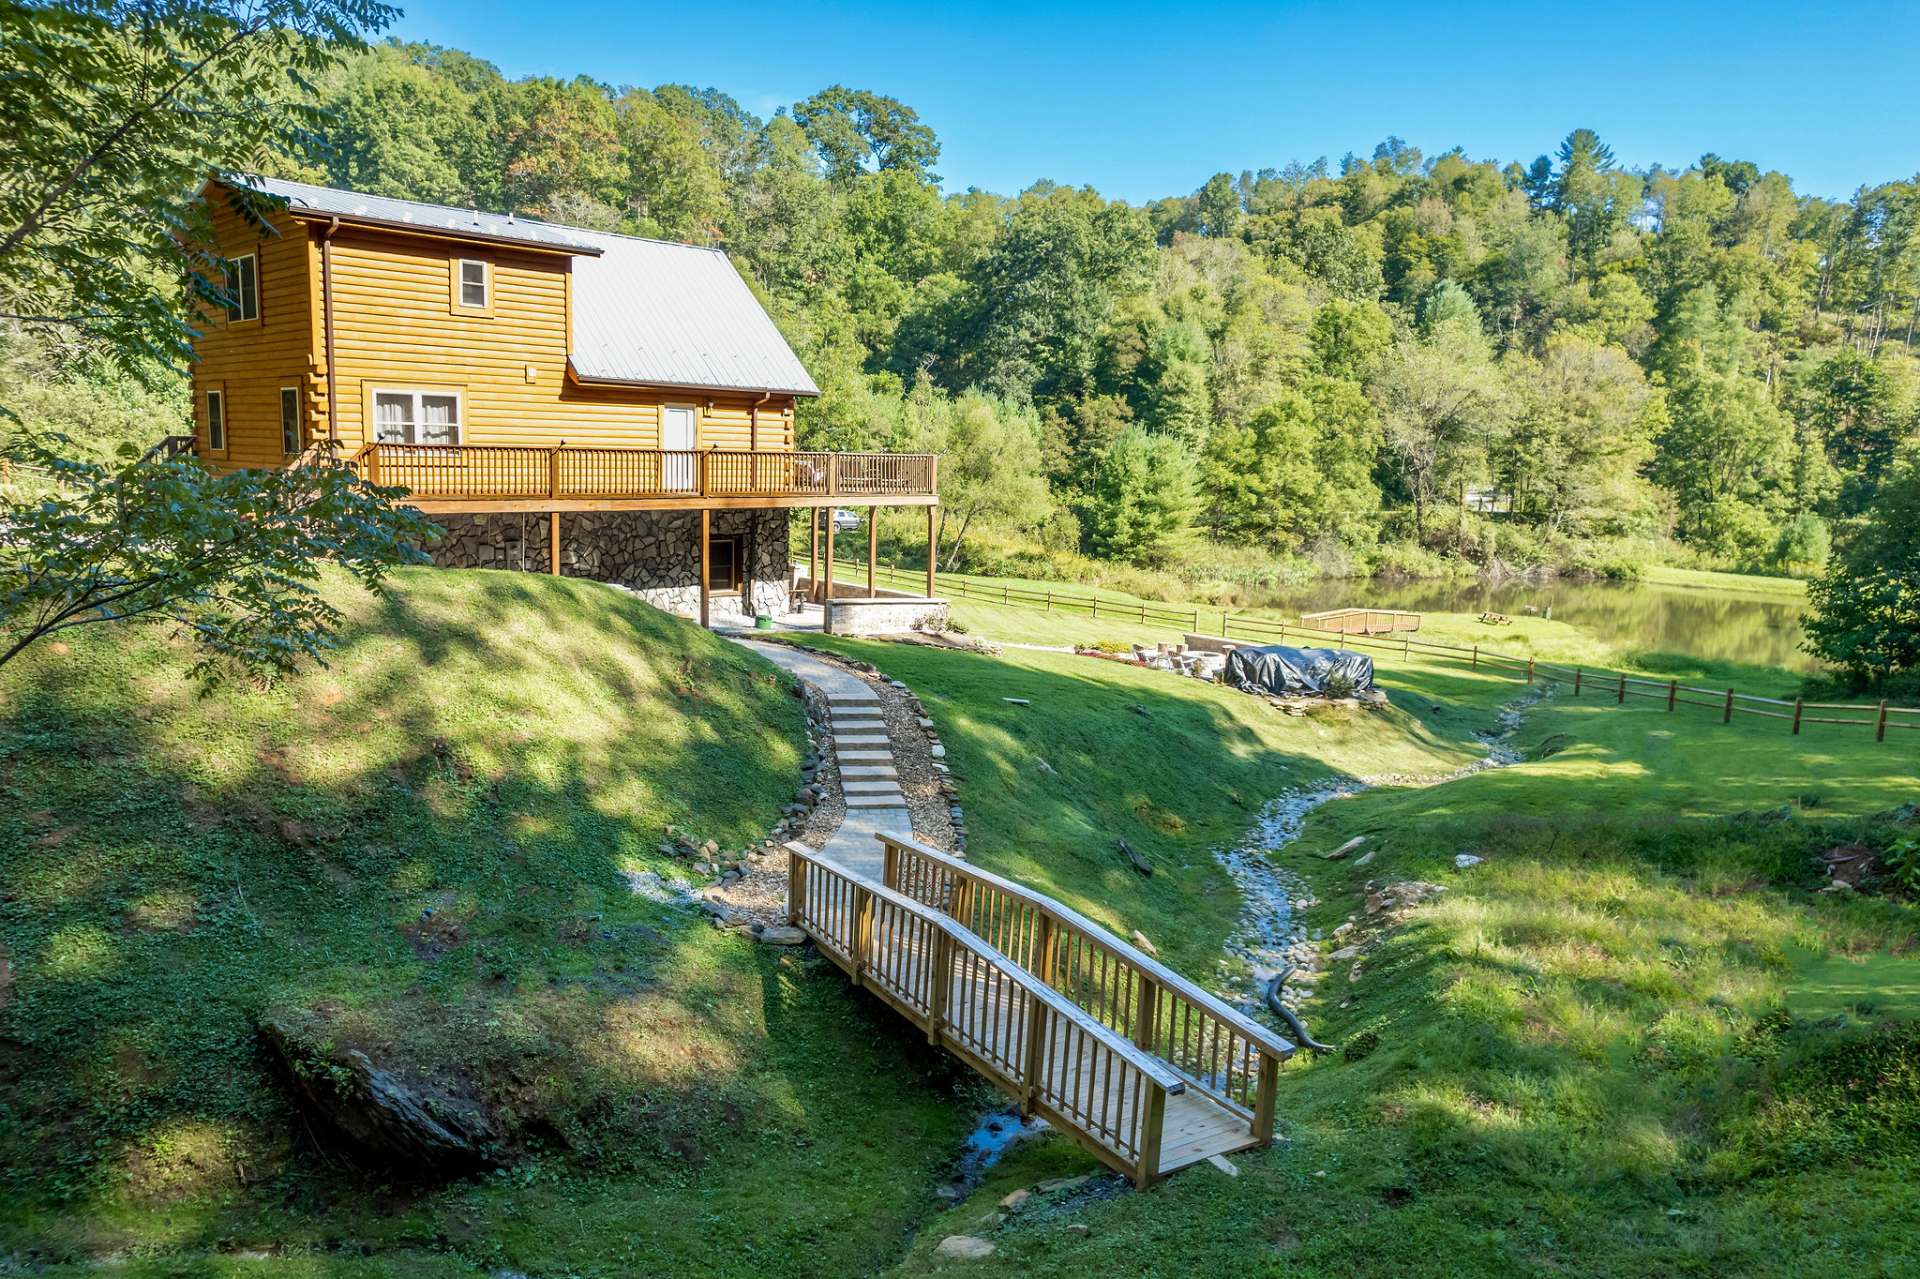 The setting offers a small mountain stream meandering through the yard.